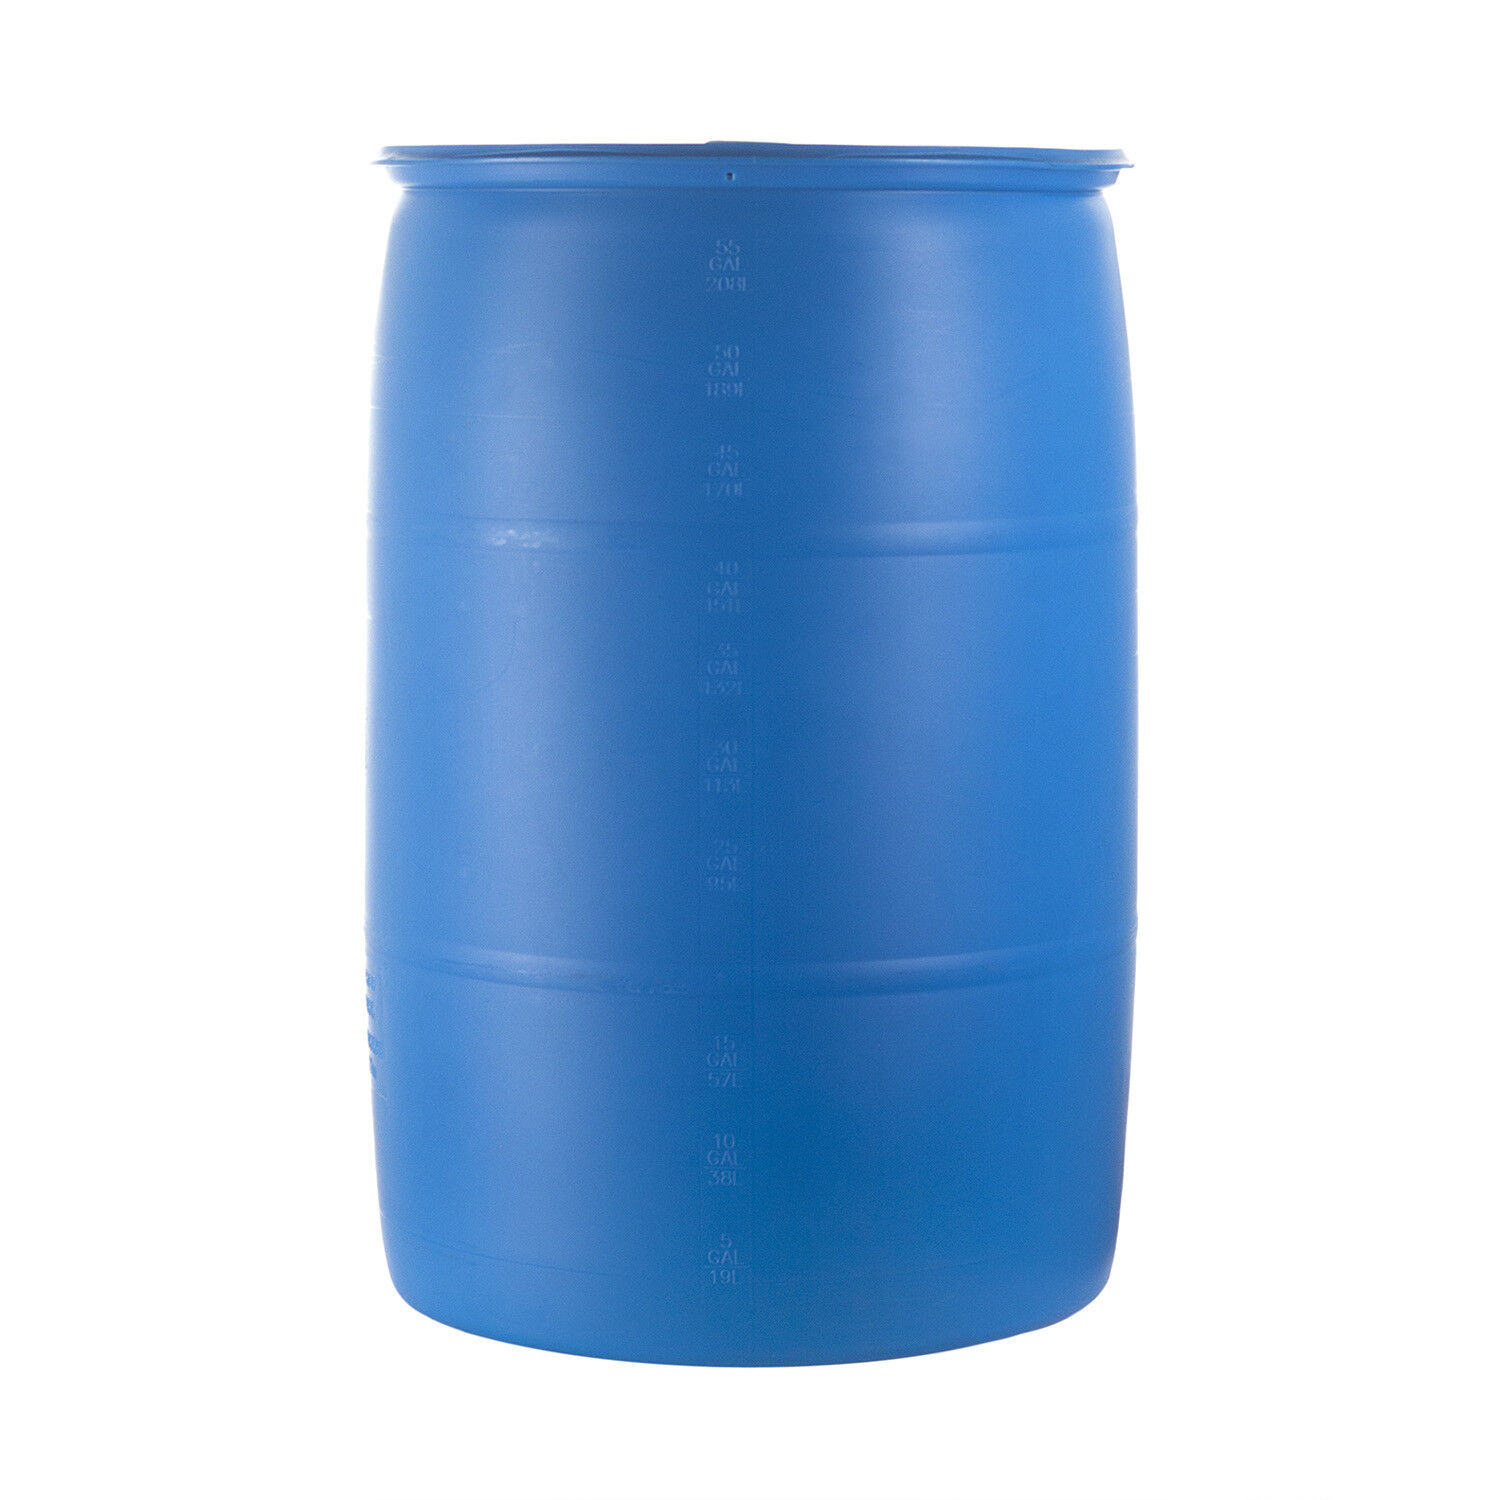 55 gallon blue plastic drums. Great for water storage. купит